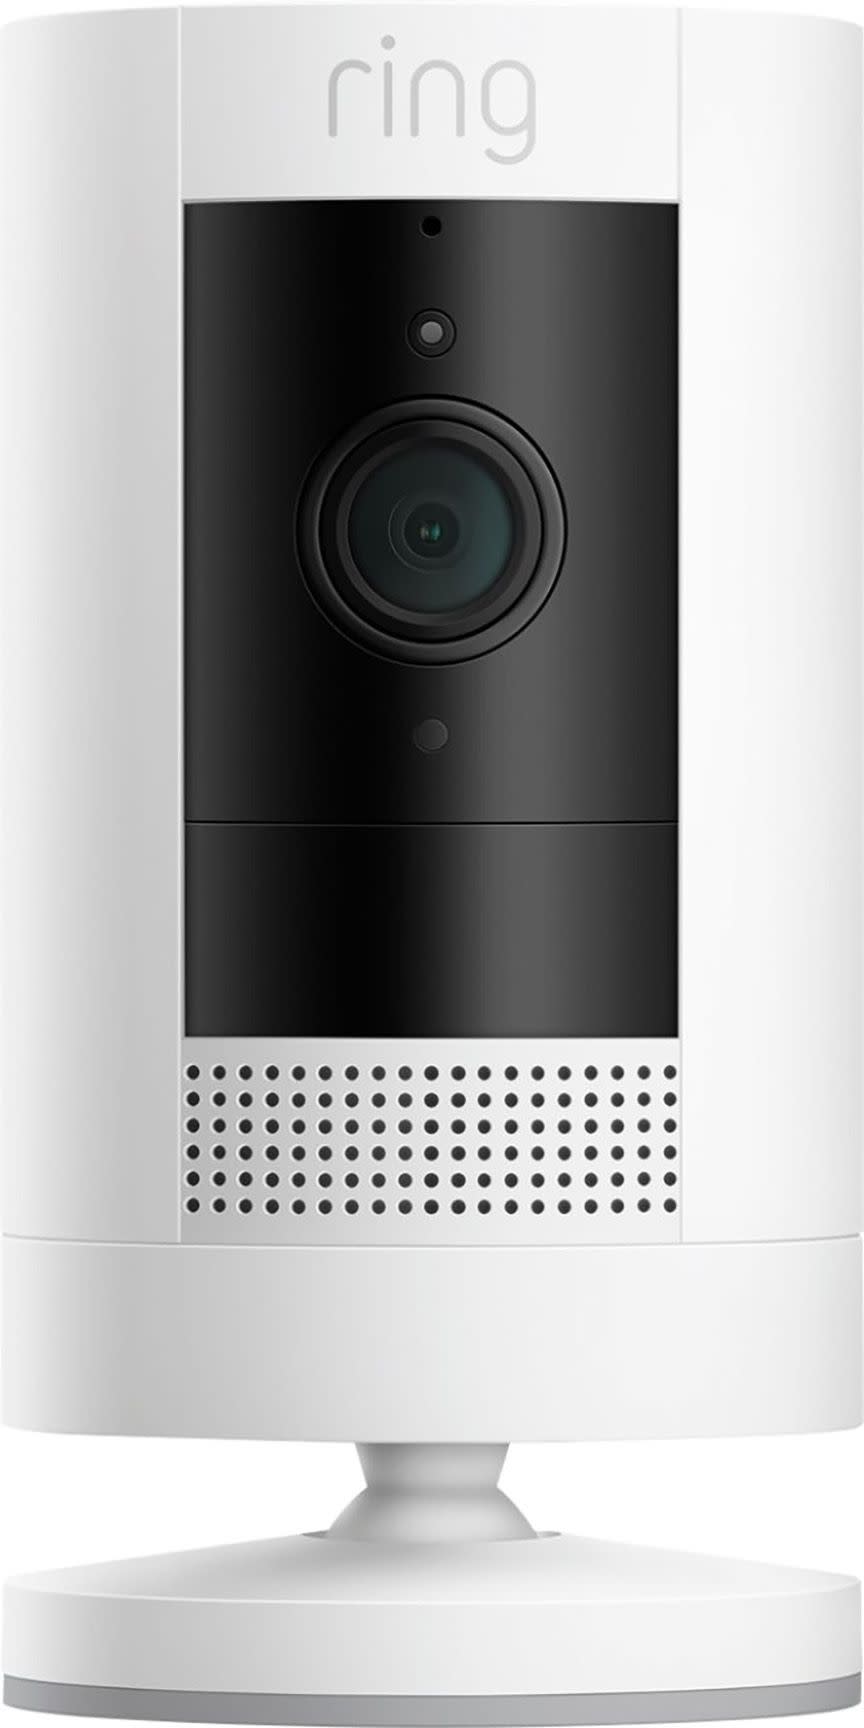 white Ring security camera